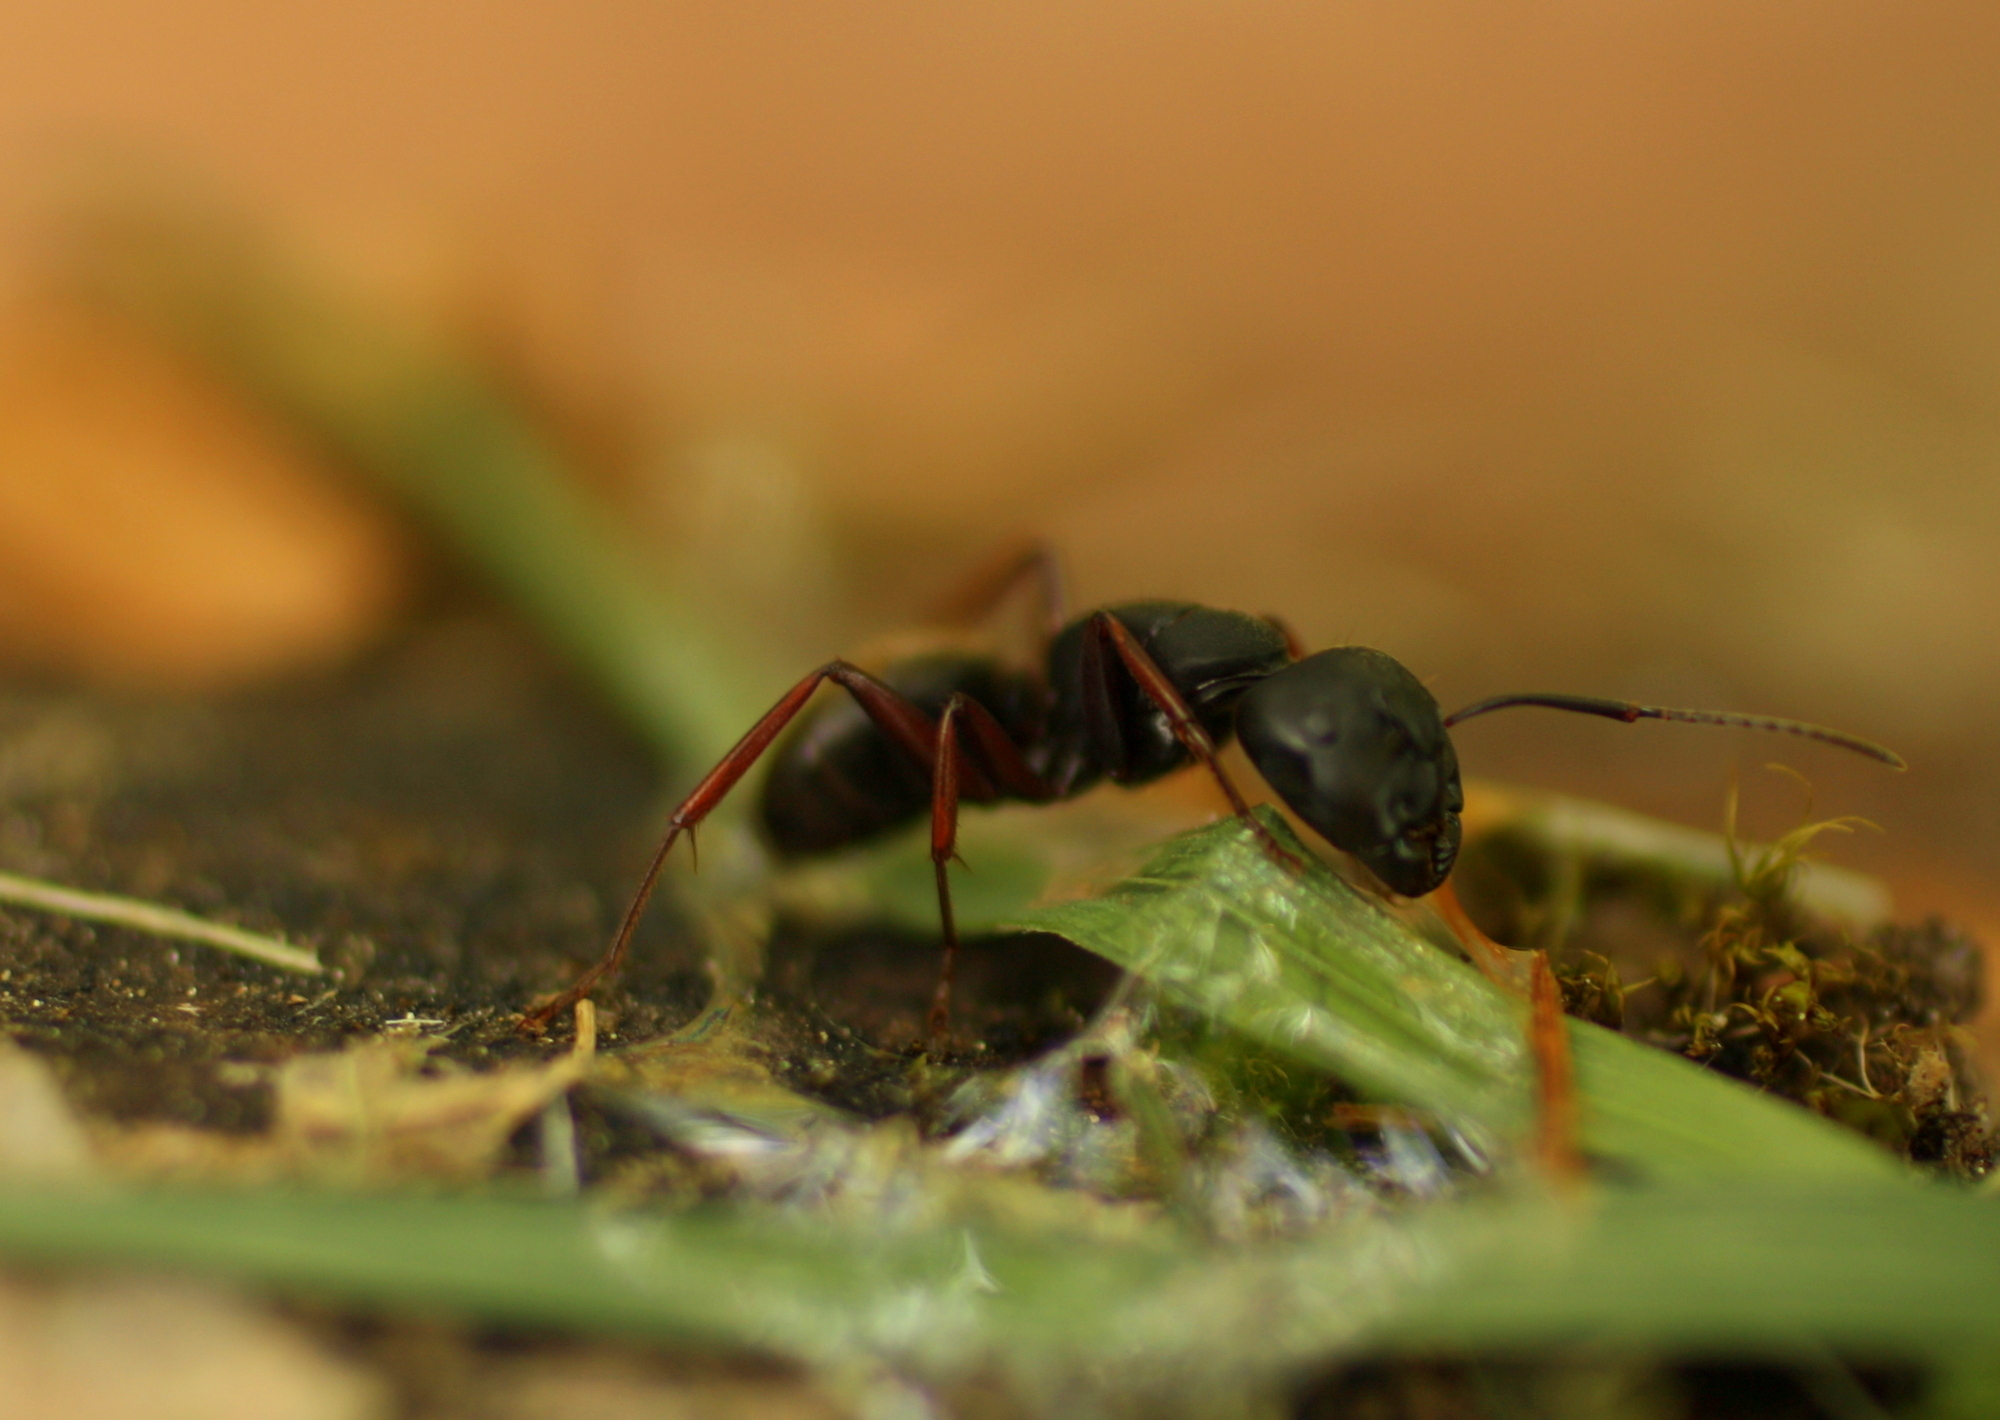 a close up image of a small ant ant insect crawling along on some vegetation